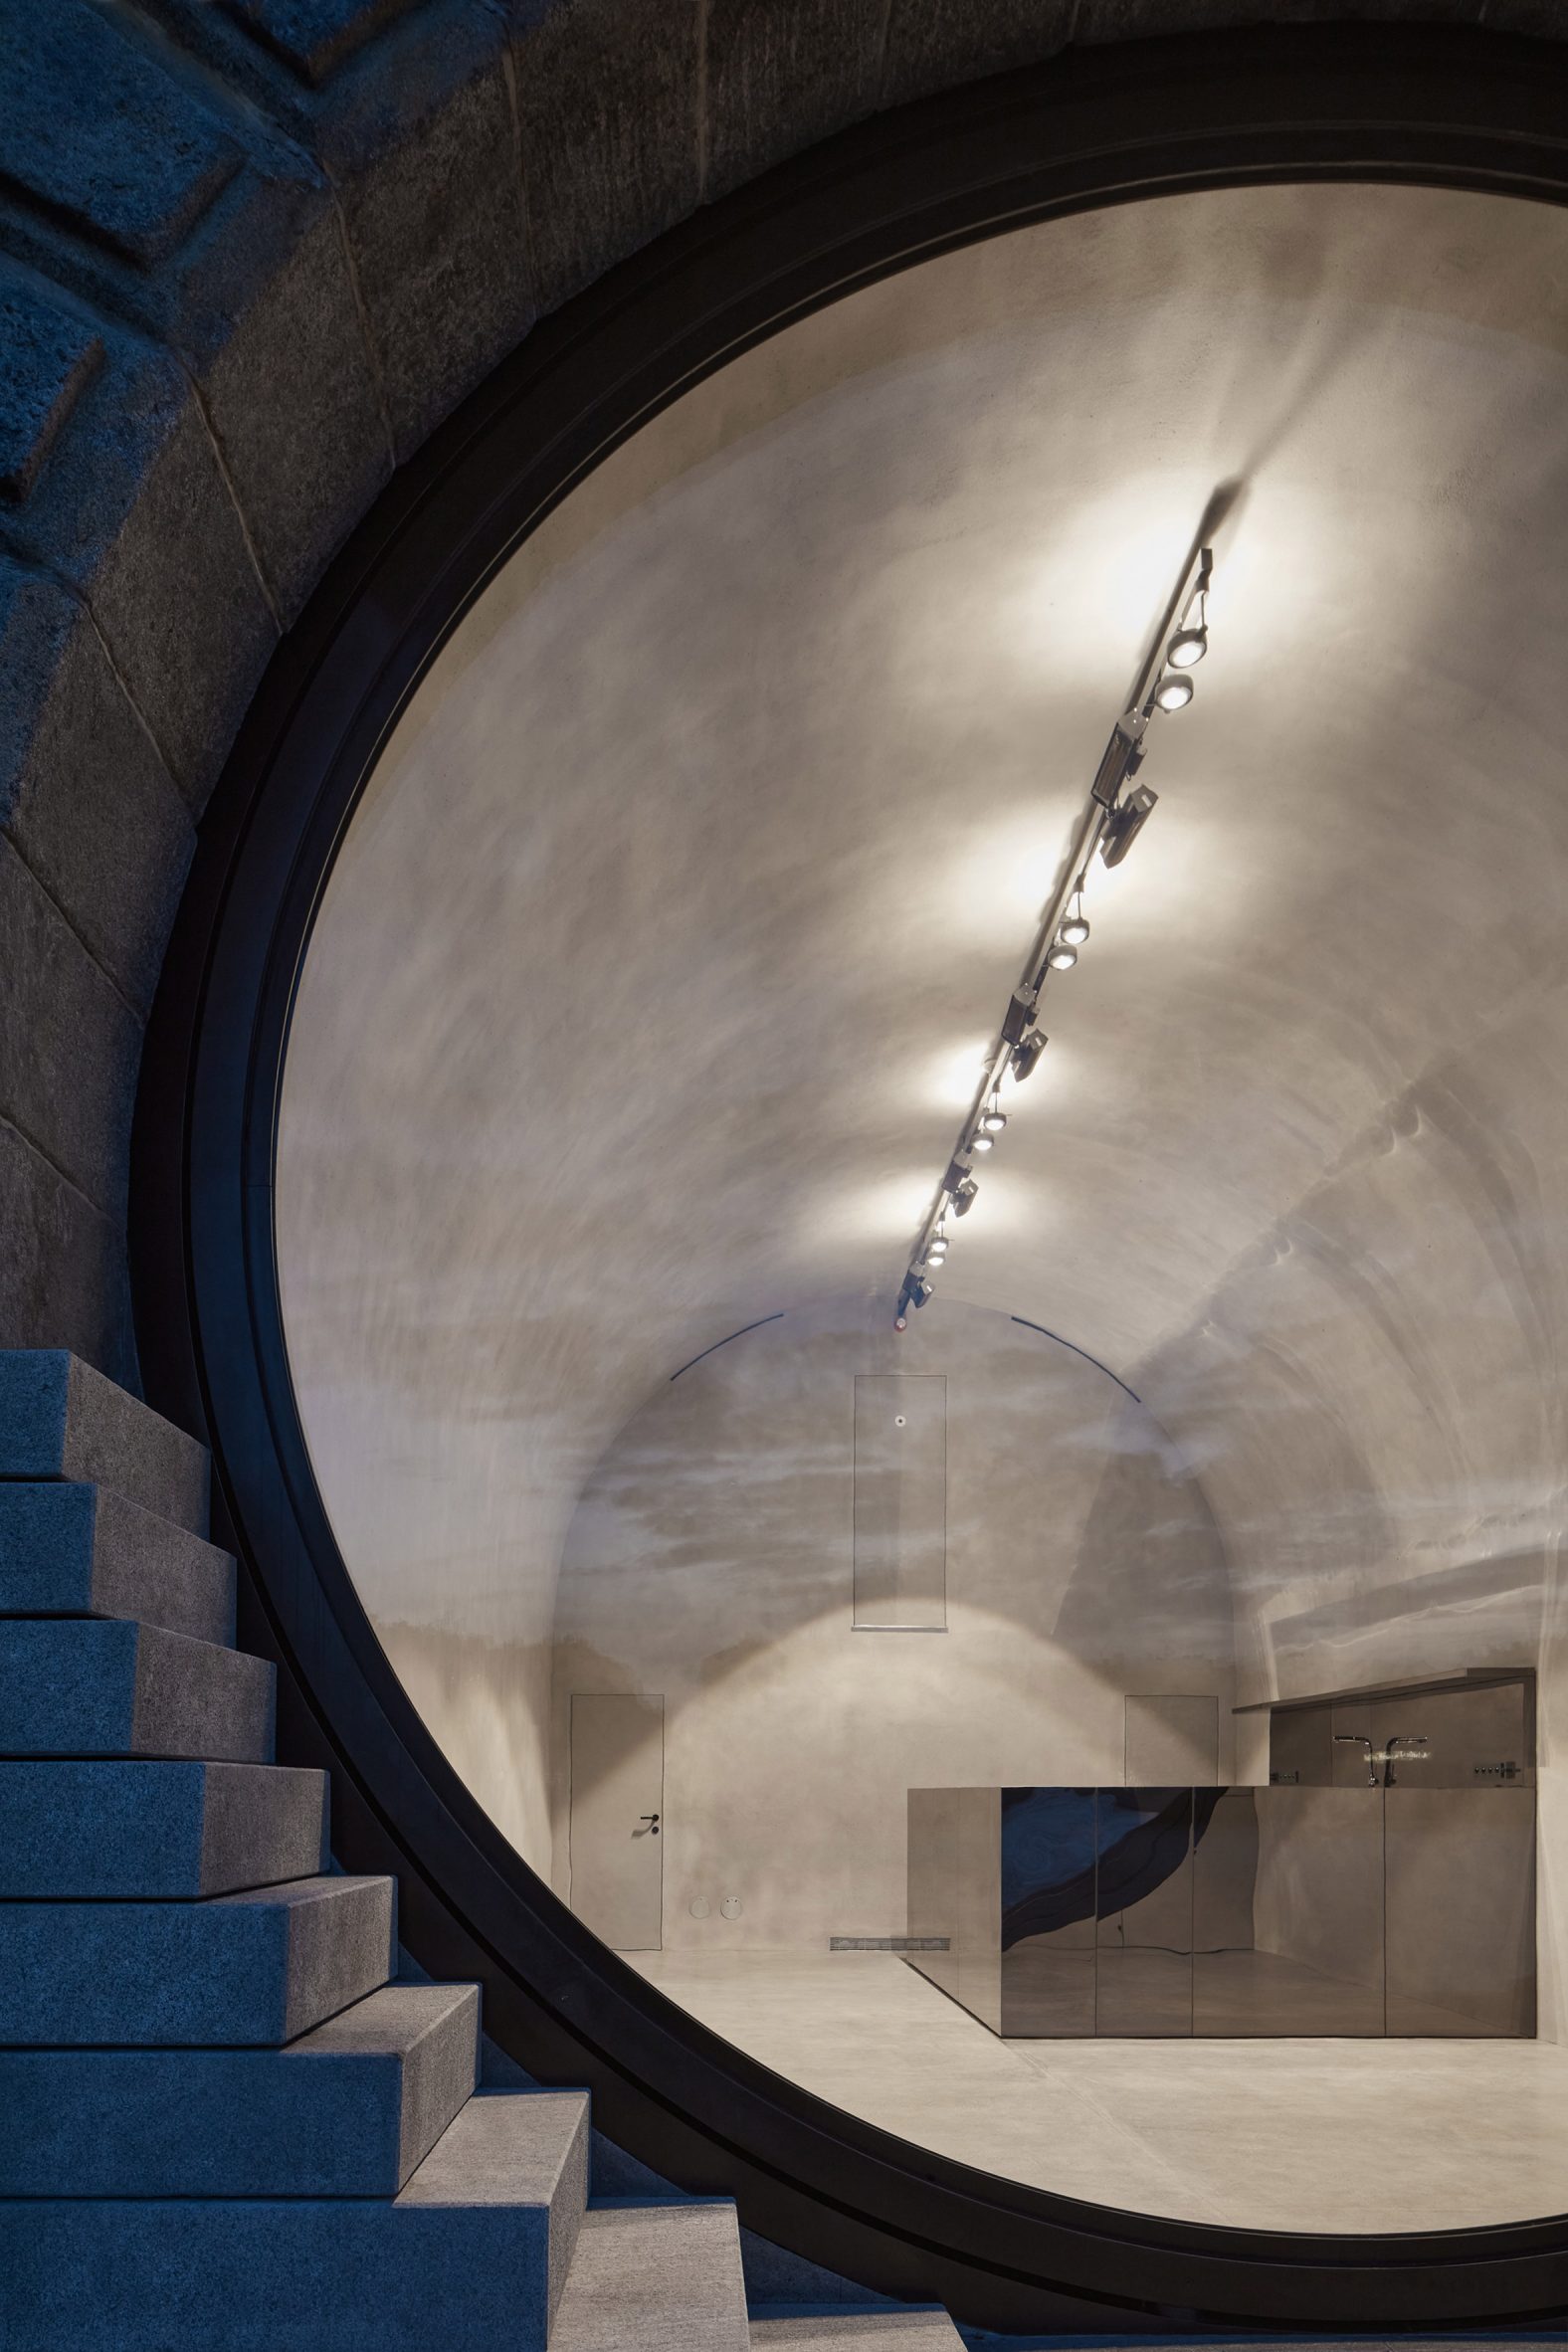 The interior of the vaults along the prague waterfront have a grey concrete finish